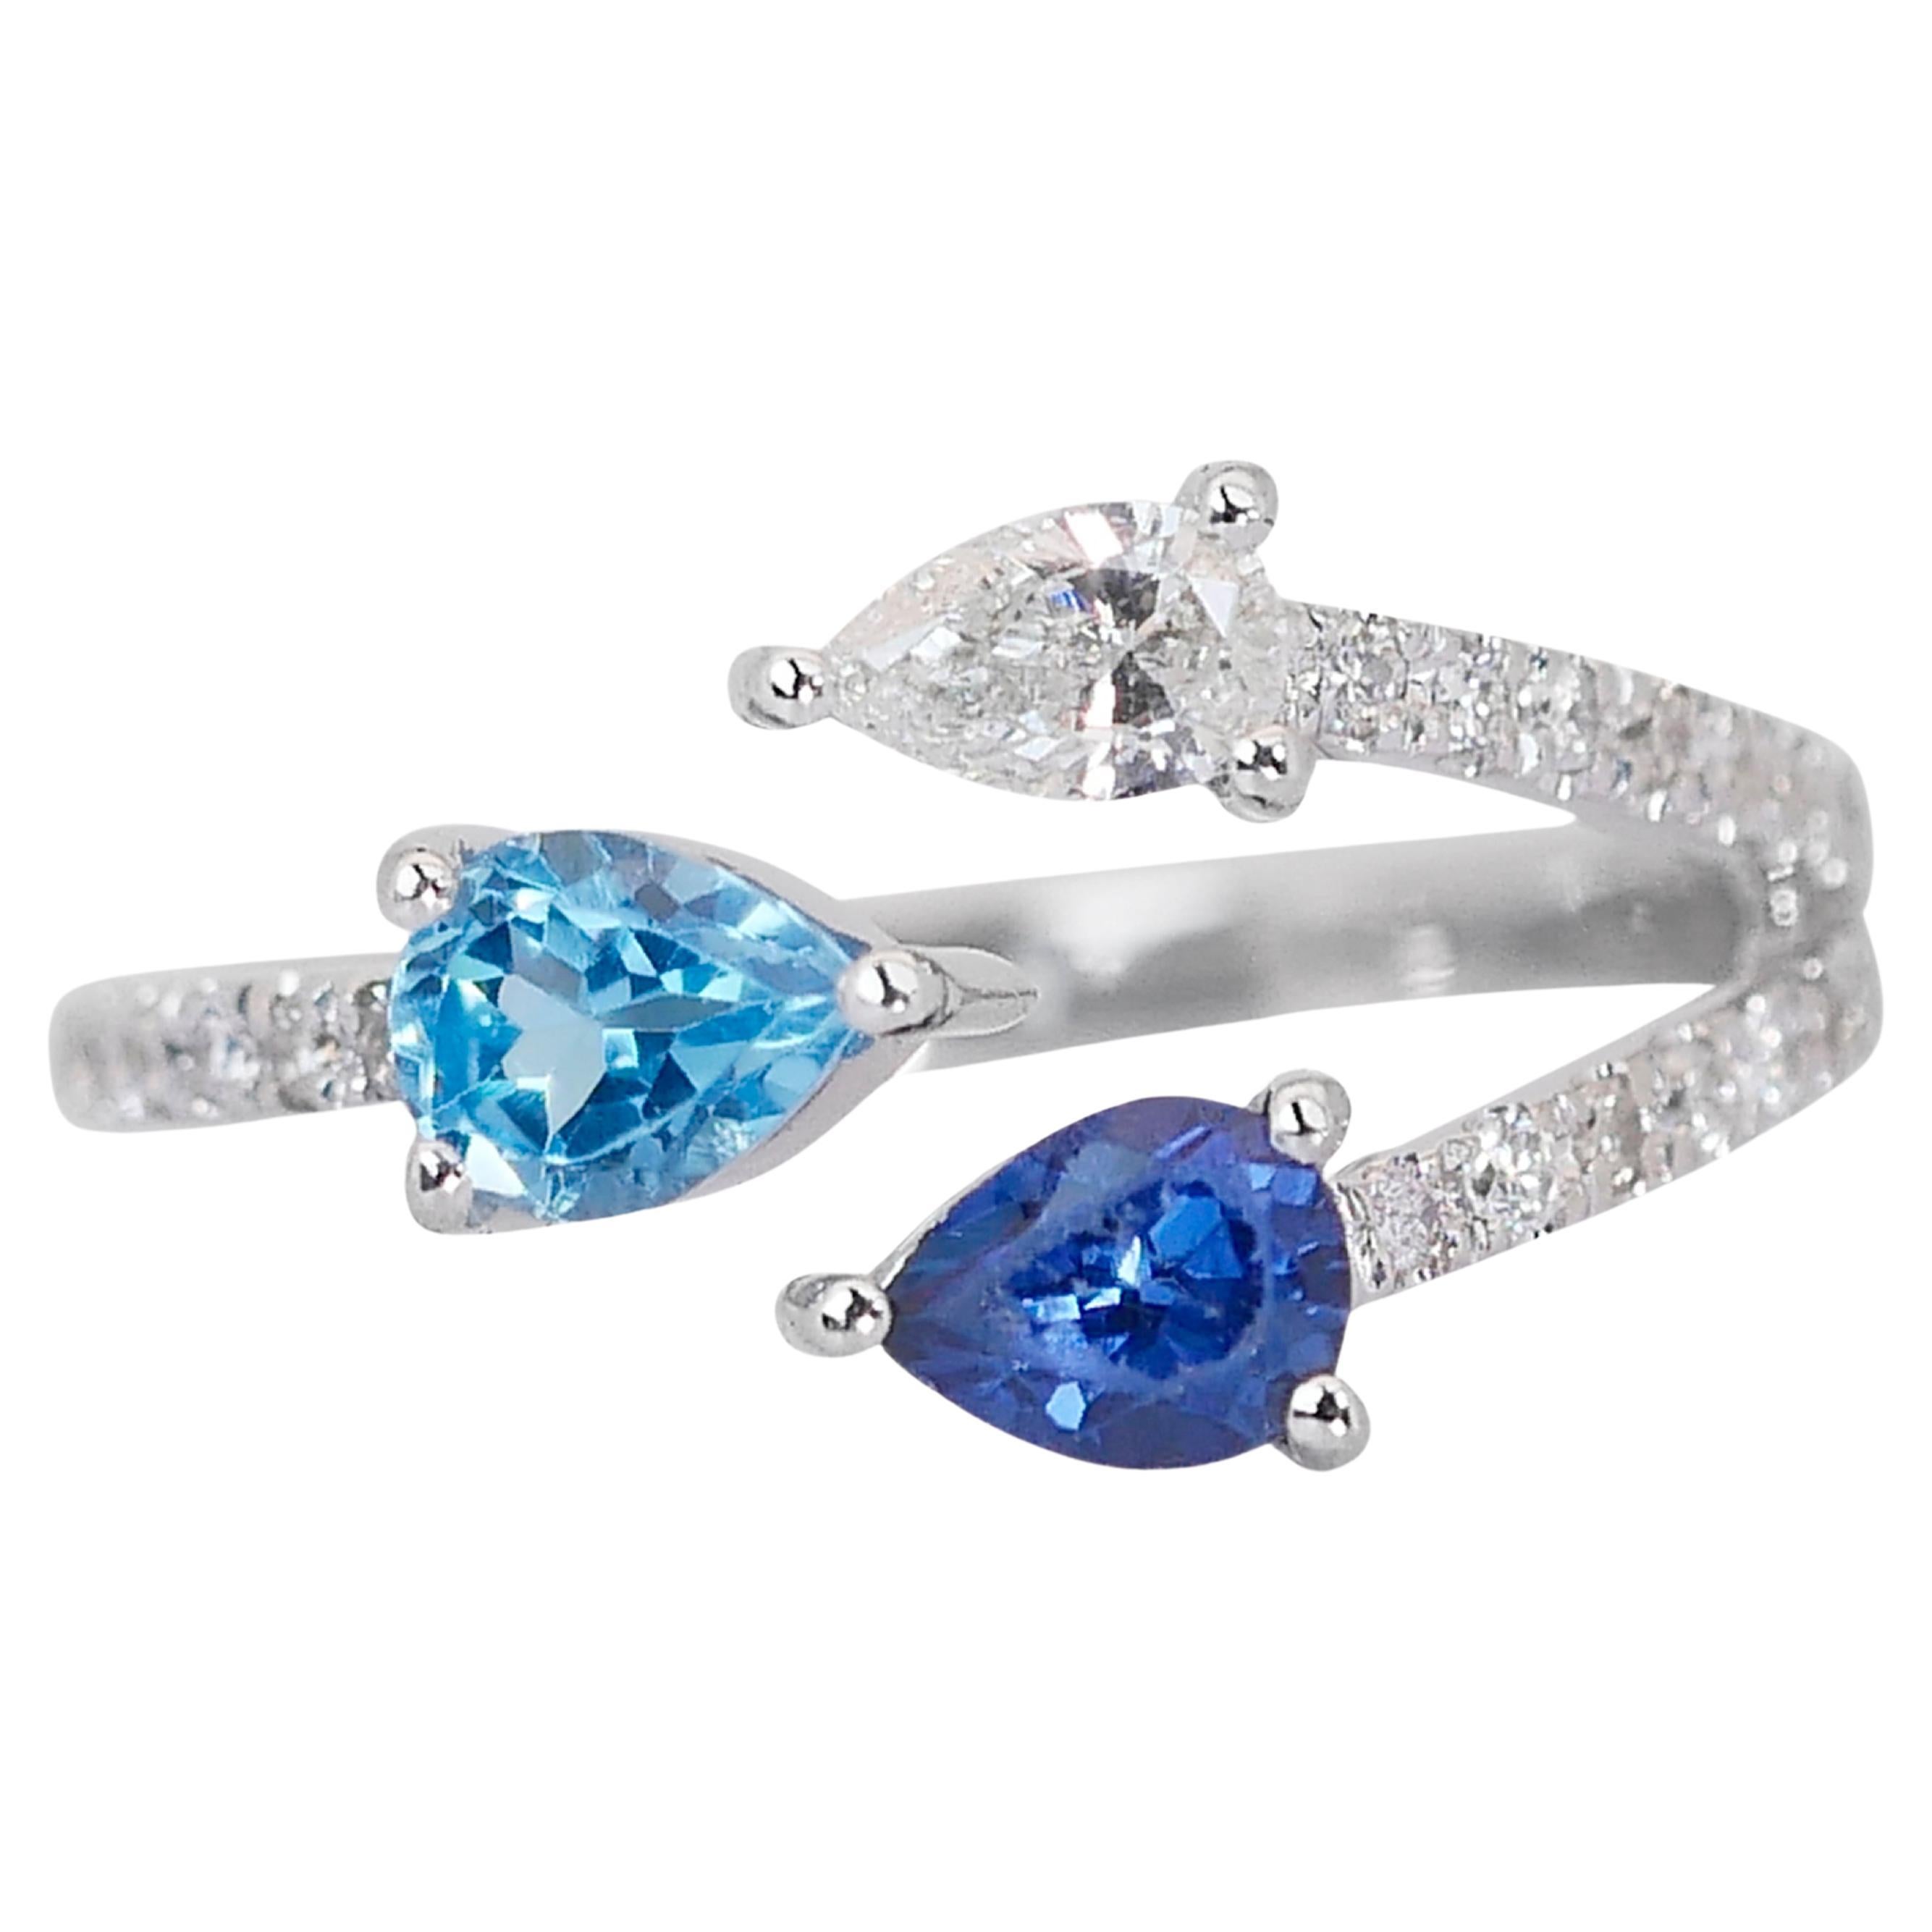 Stylish 1.07ct Topaz, Sapphire & Diamond Fancy-Colored Ring in 14k White Gold